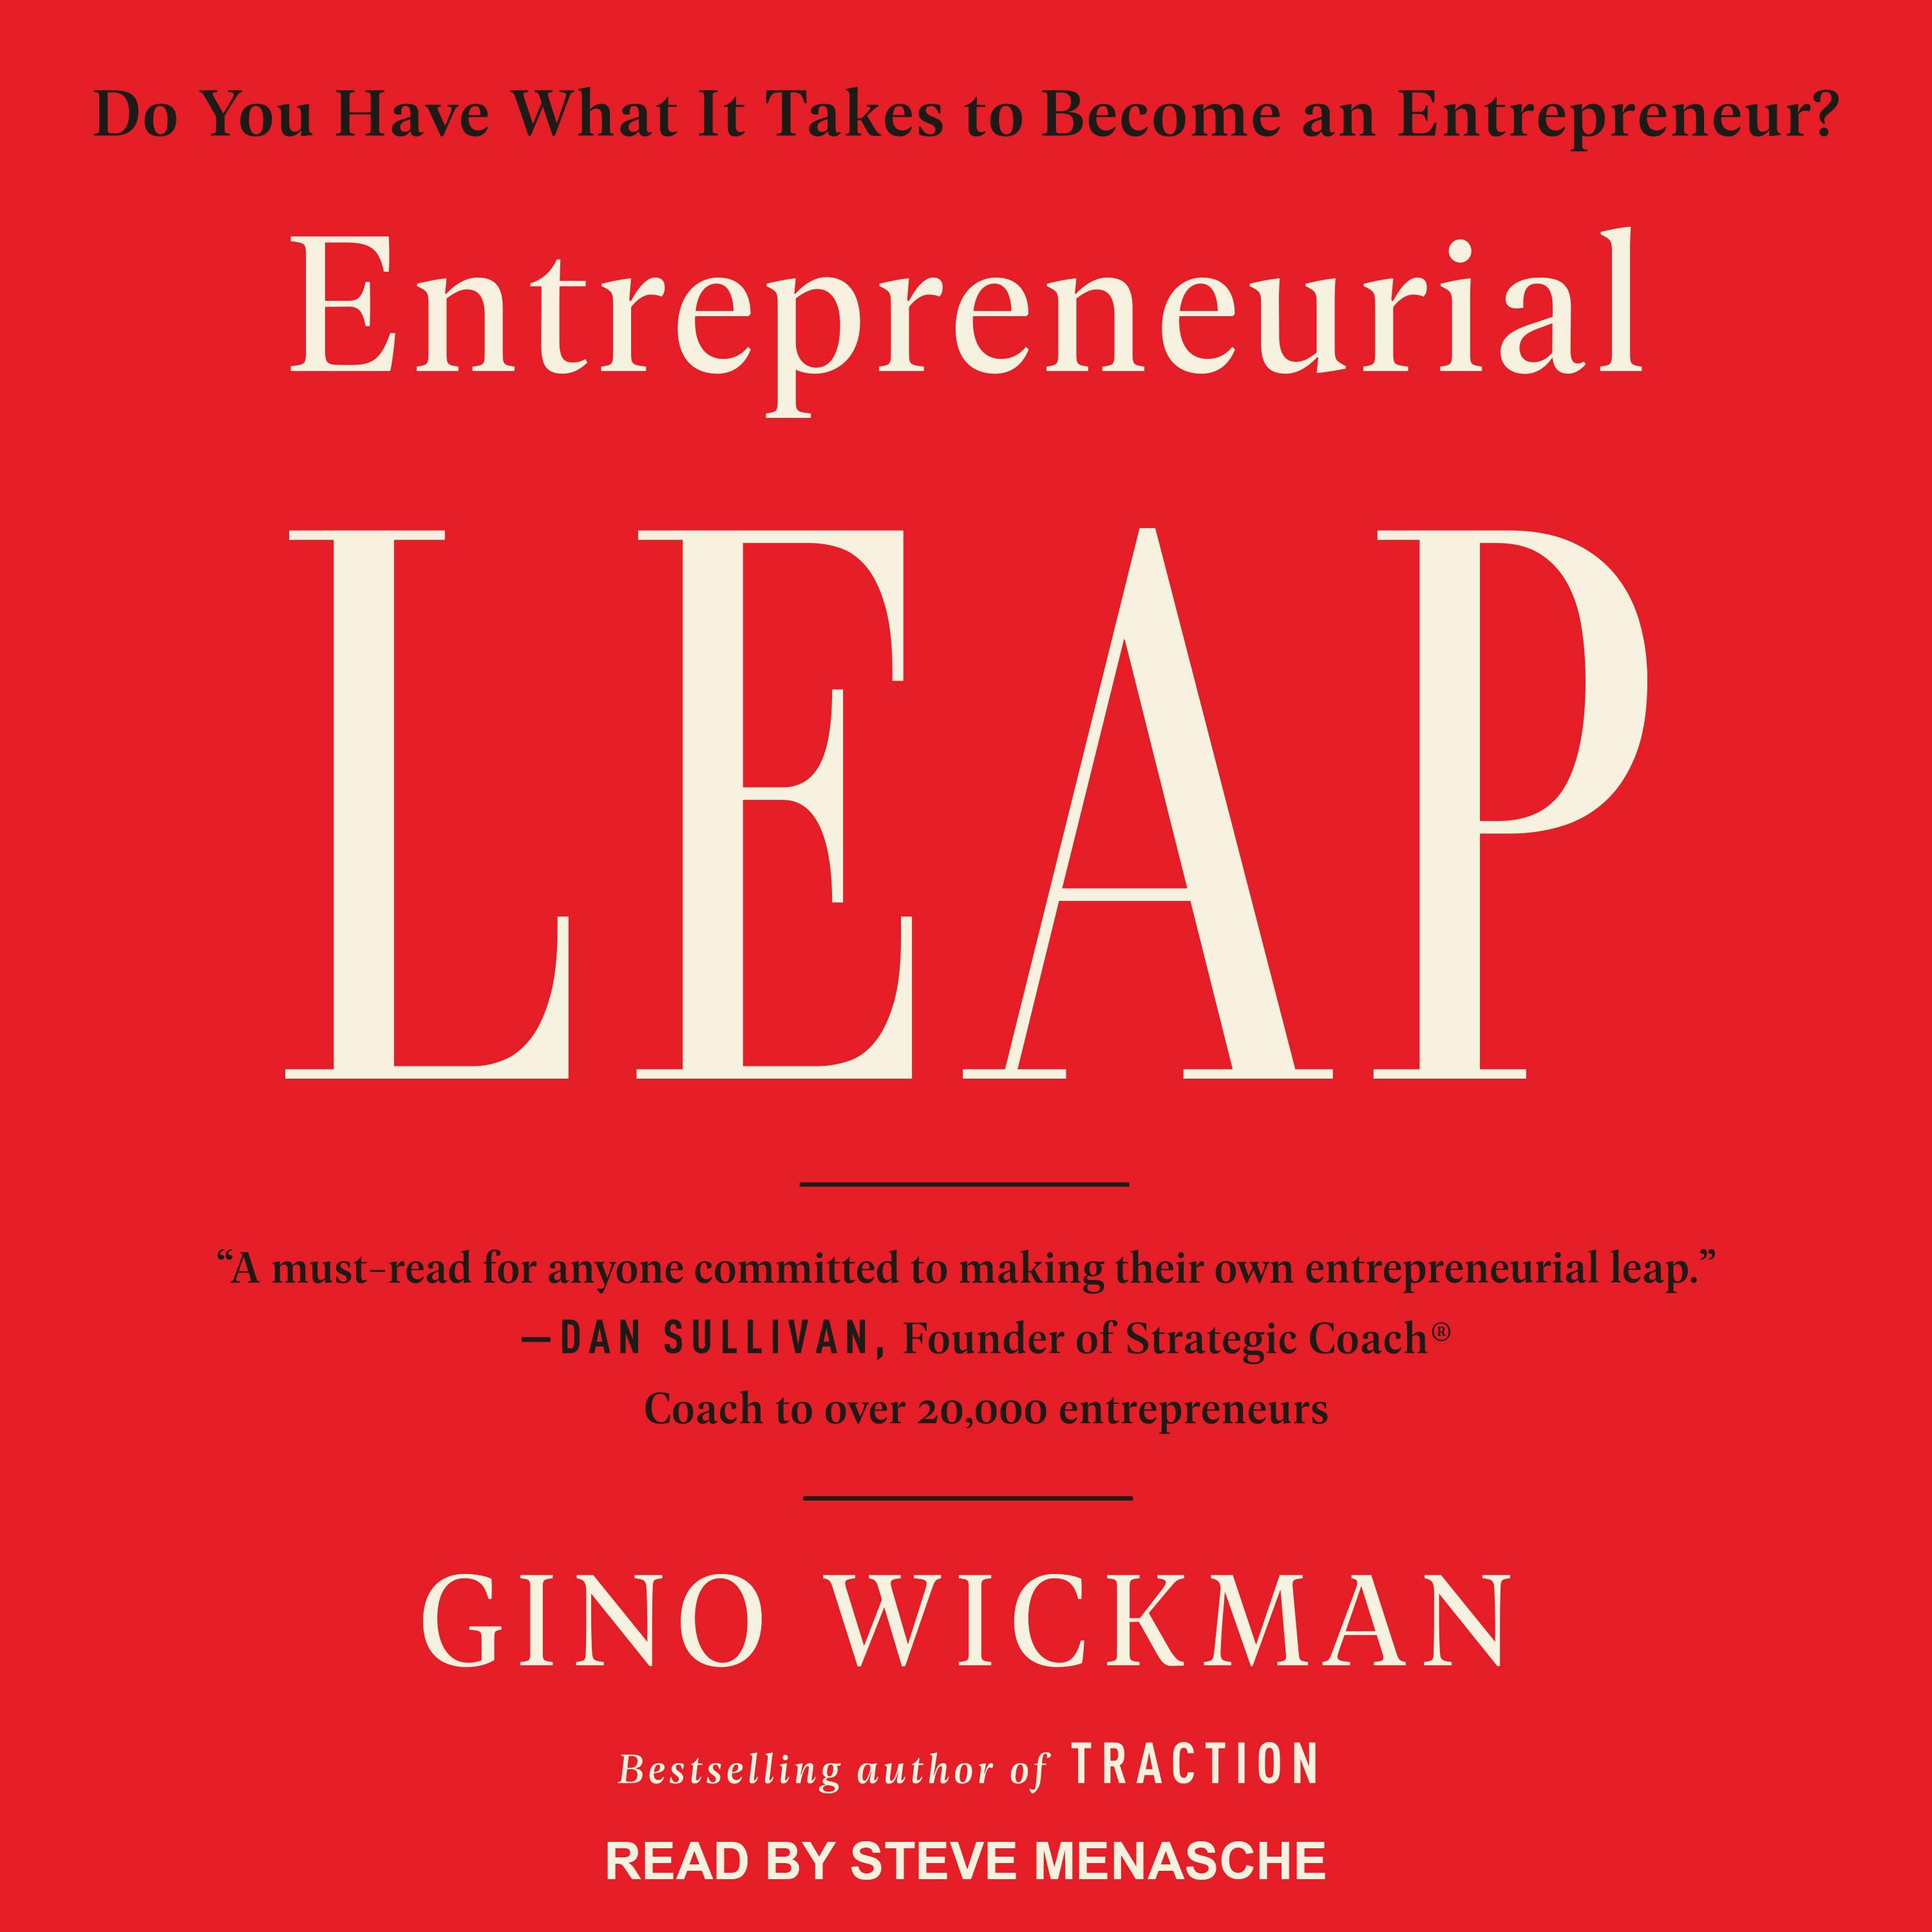 Entrepreneurial Leap: Do You Have What it Takes to Become an Entrepreneur? - undefined